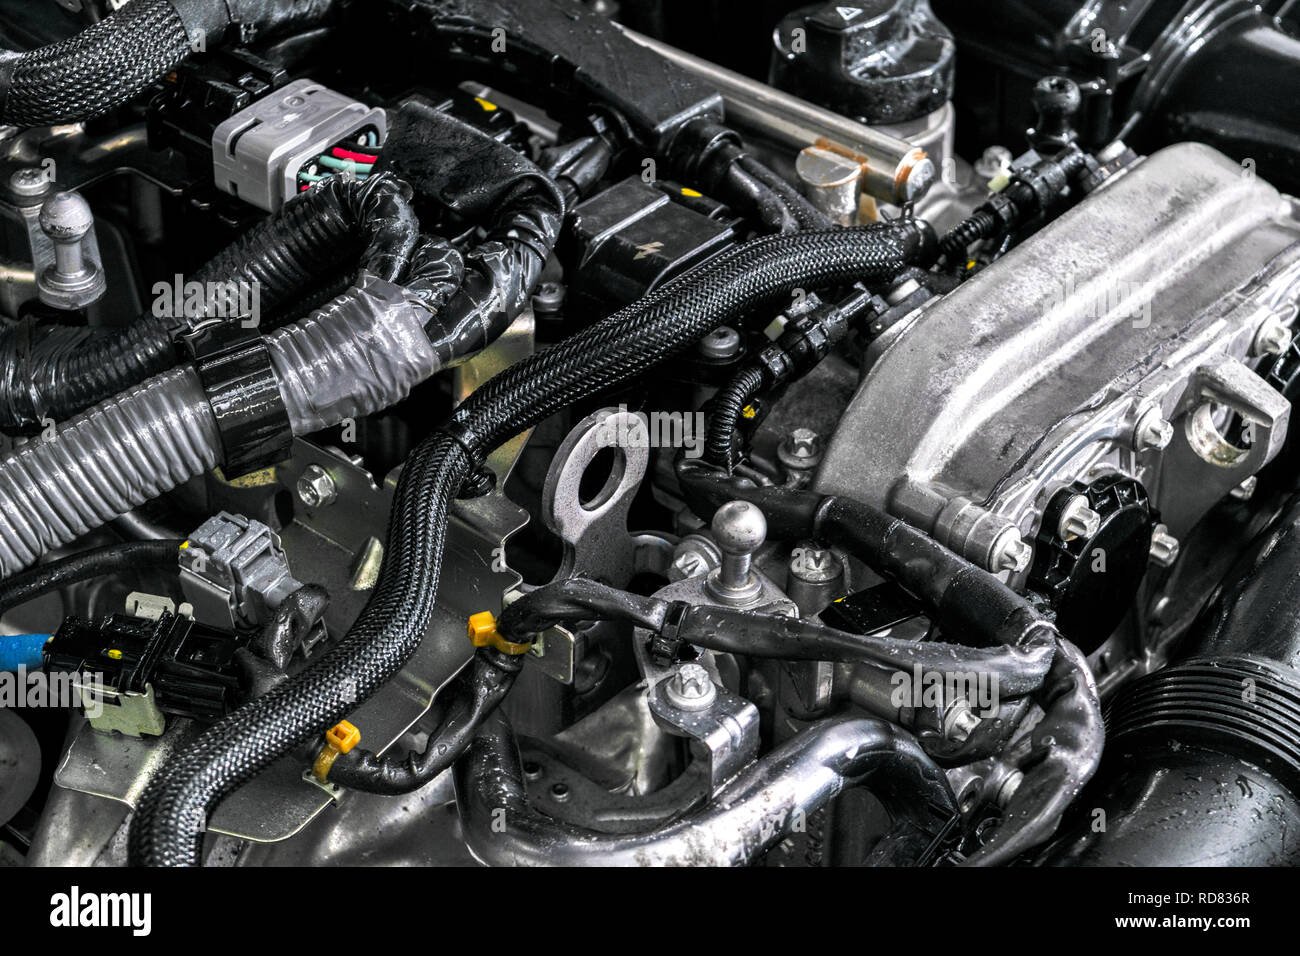 Car engine. Car engine part. Close-up image of an internal combustion engine. Engine detailing in a new car. Car detailing Stock Photo